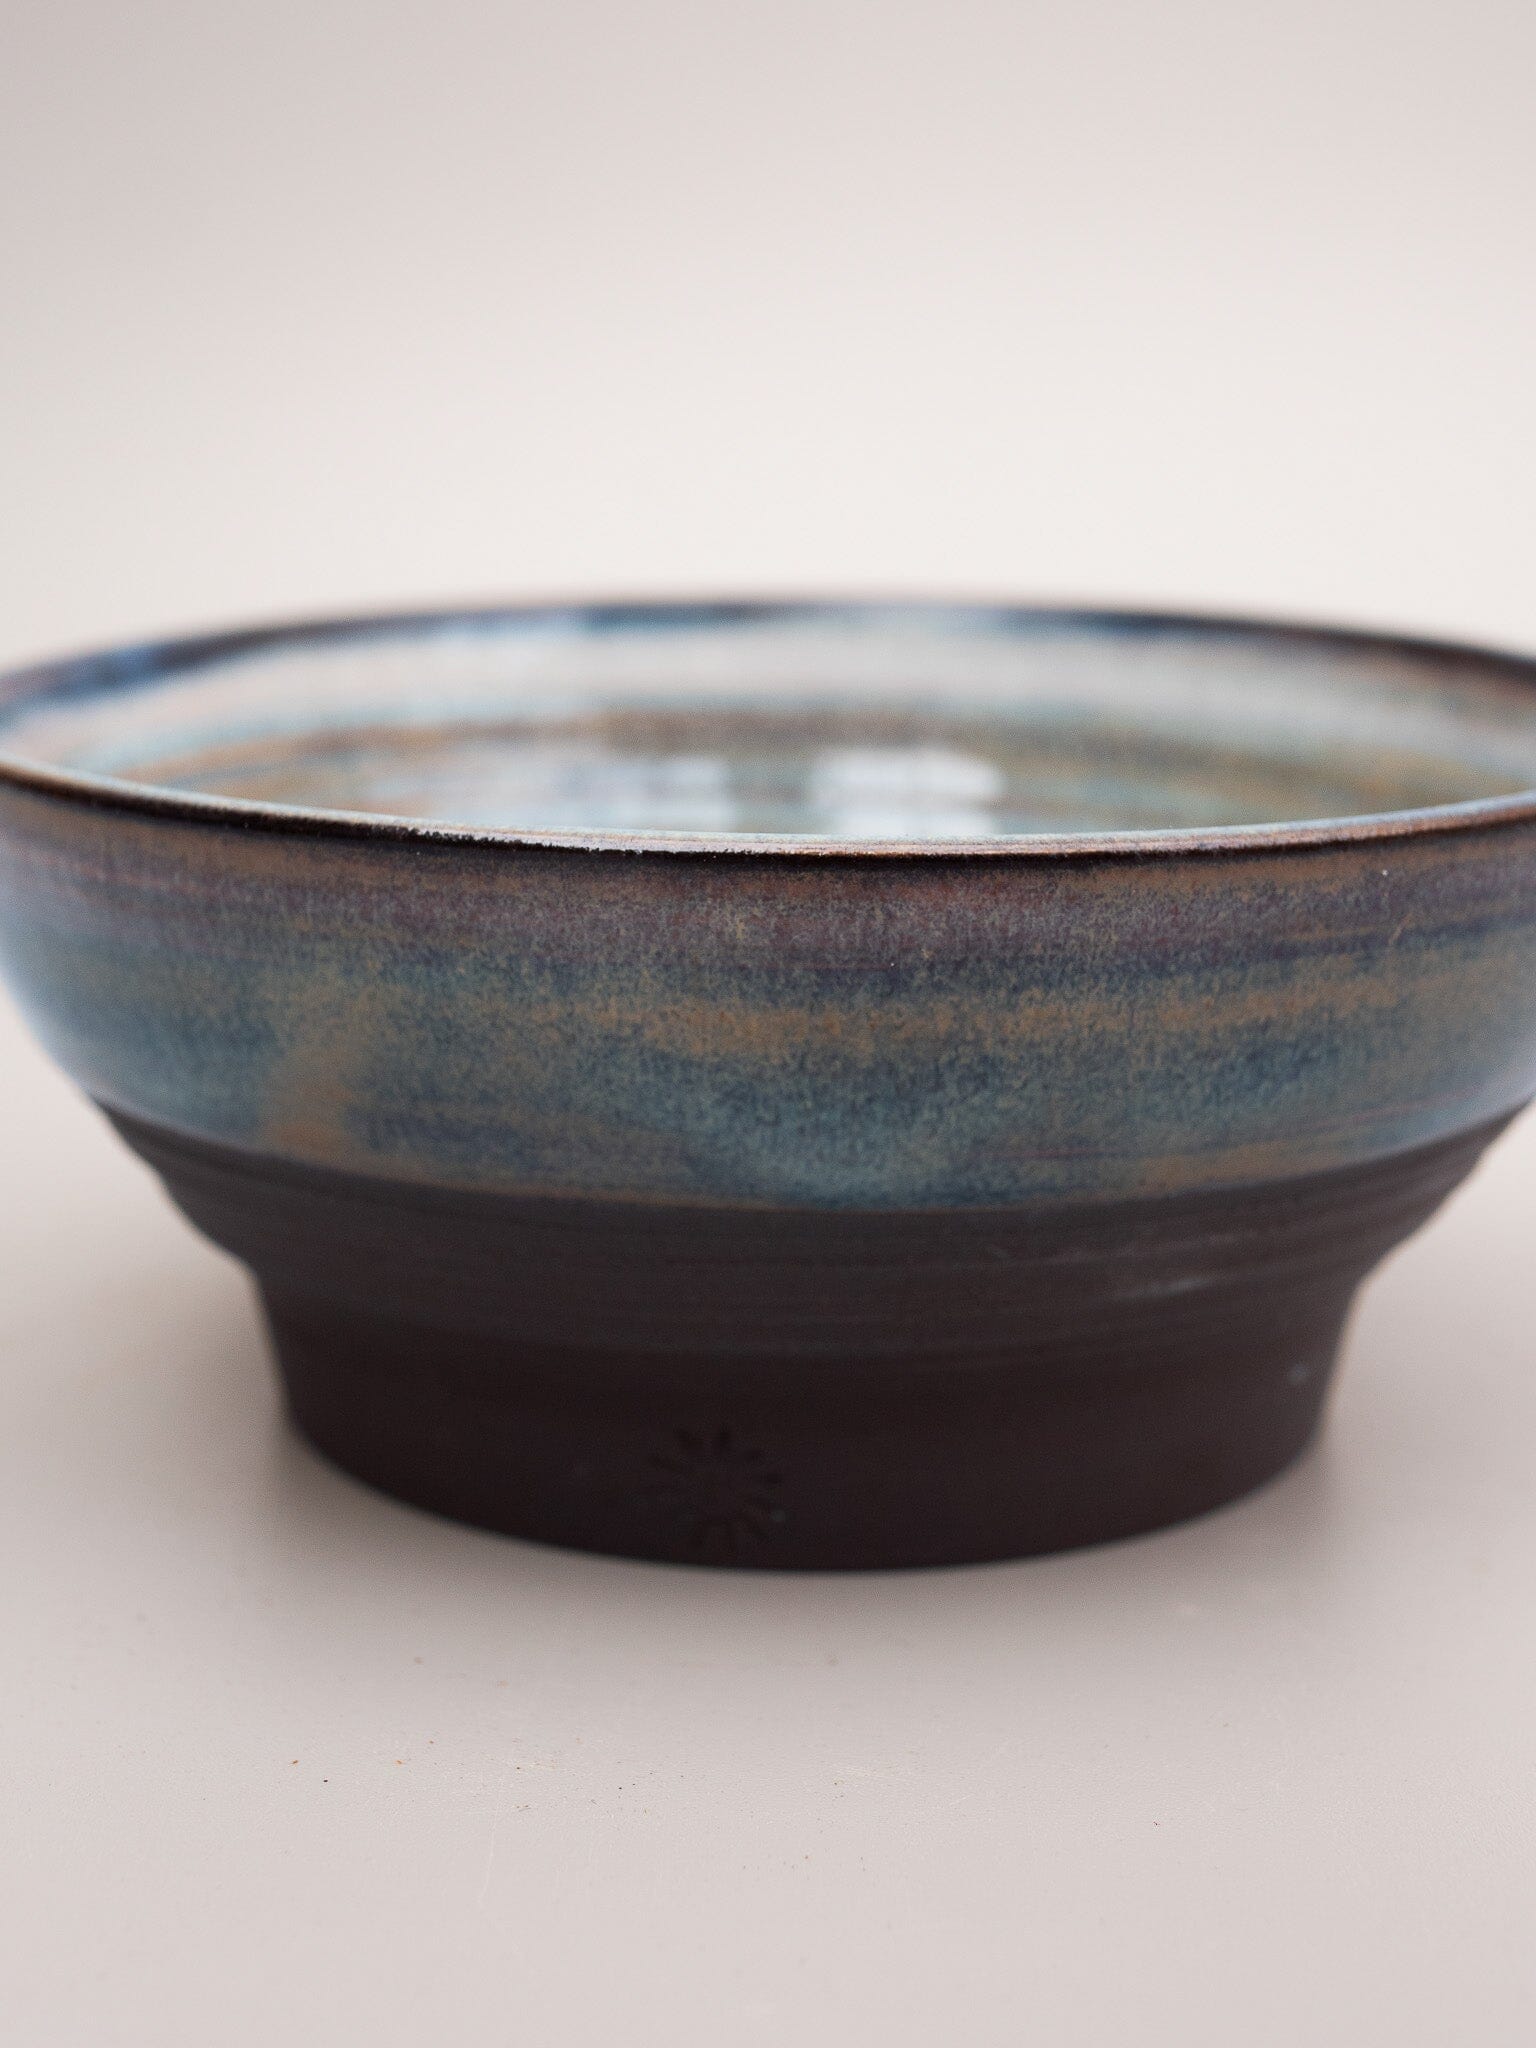 Noodle bowl, black stoneware clay, hand thrown.